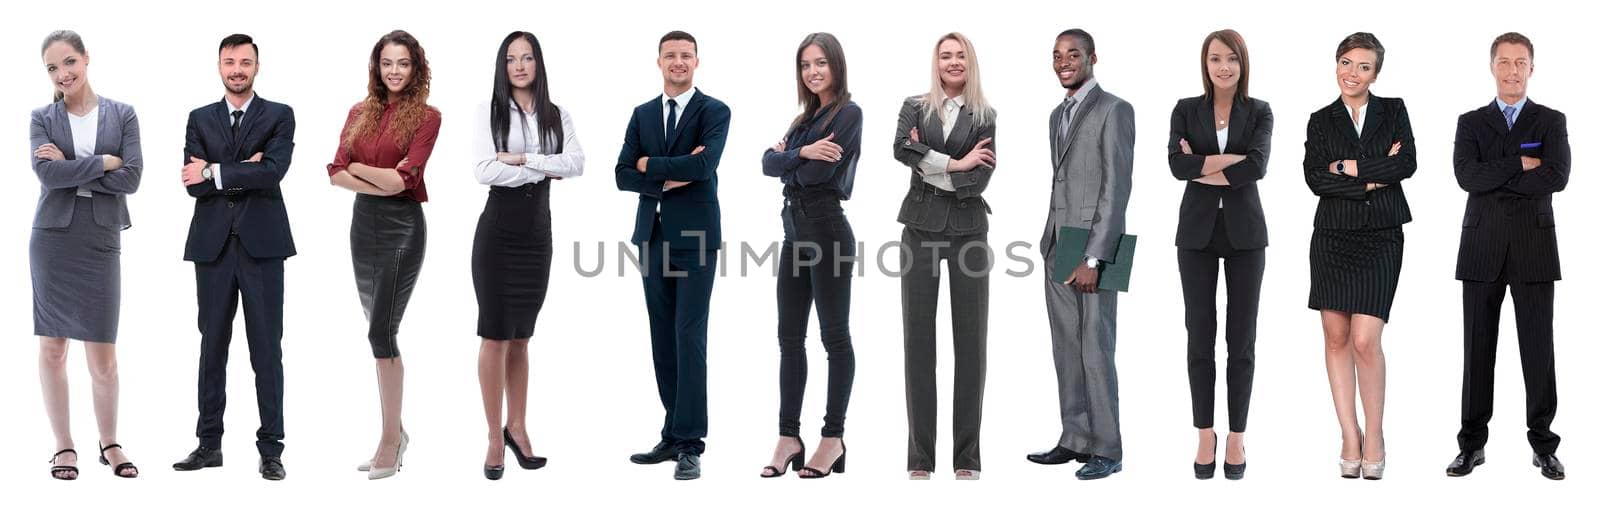 Large group of business people. Isolated over white. by asdf